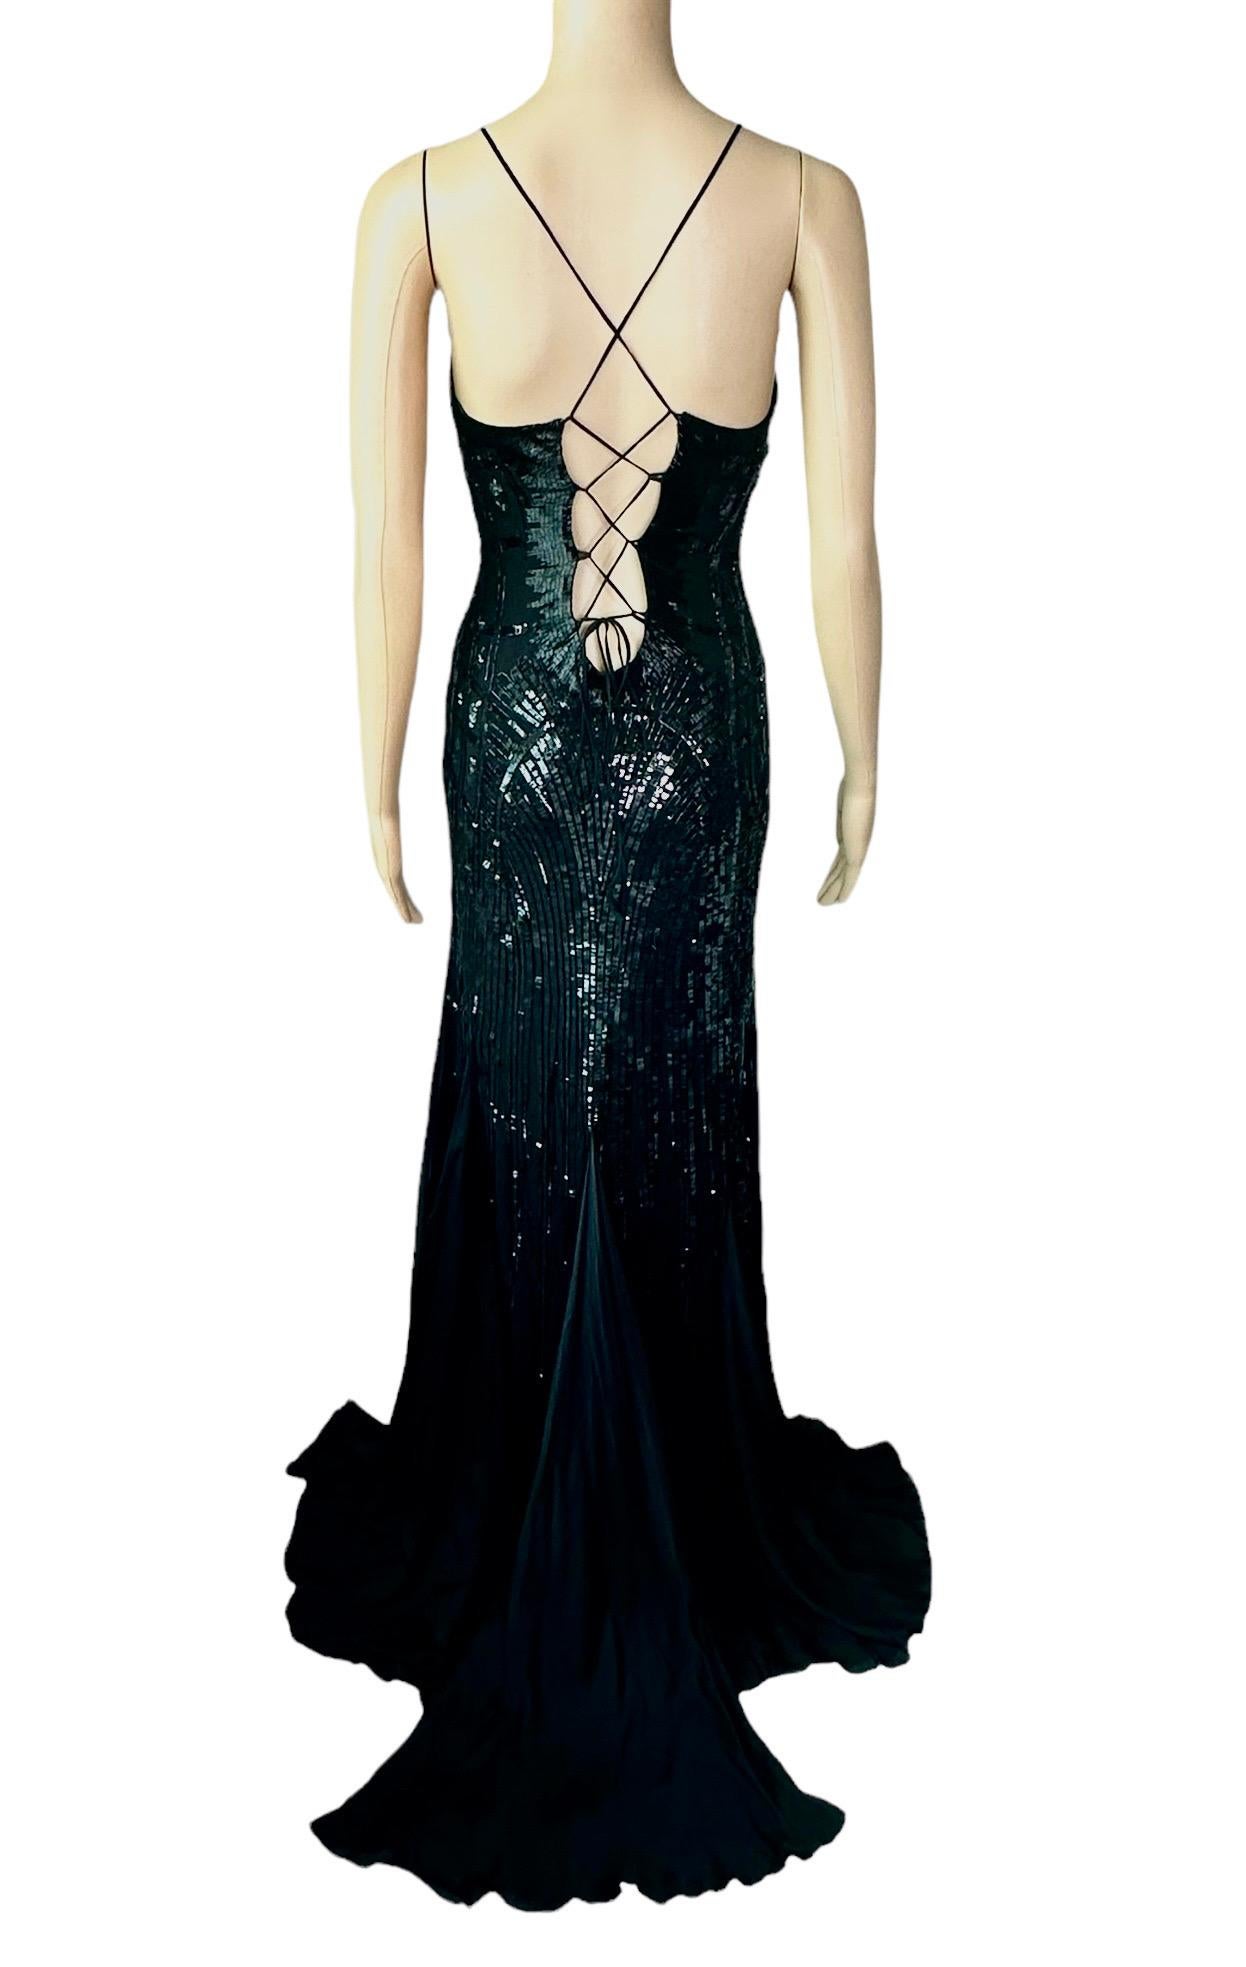 Roberto Cavalli S/S 2011 Embellished Plunged Lace Up Black Evening Dress Gown 6